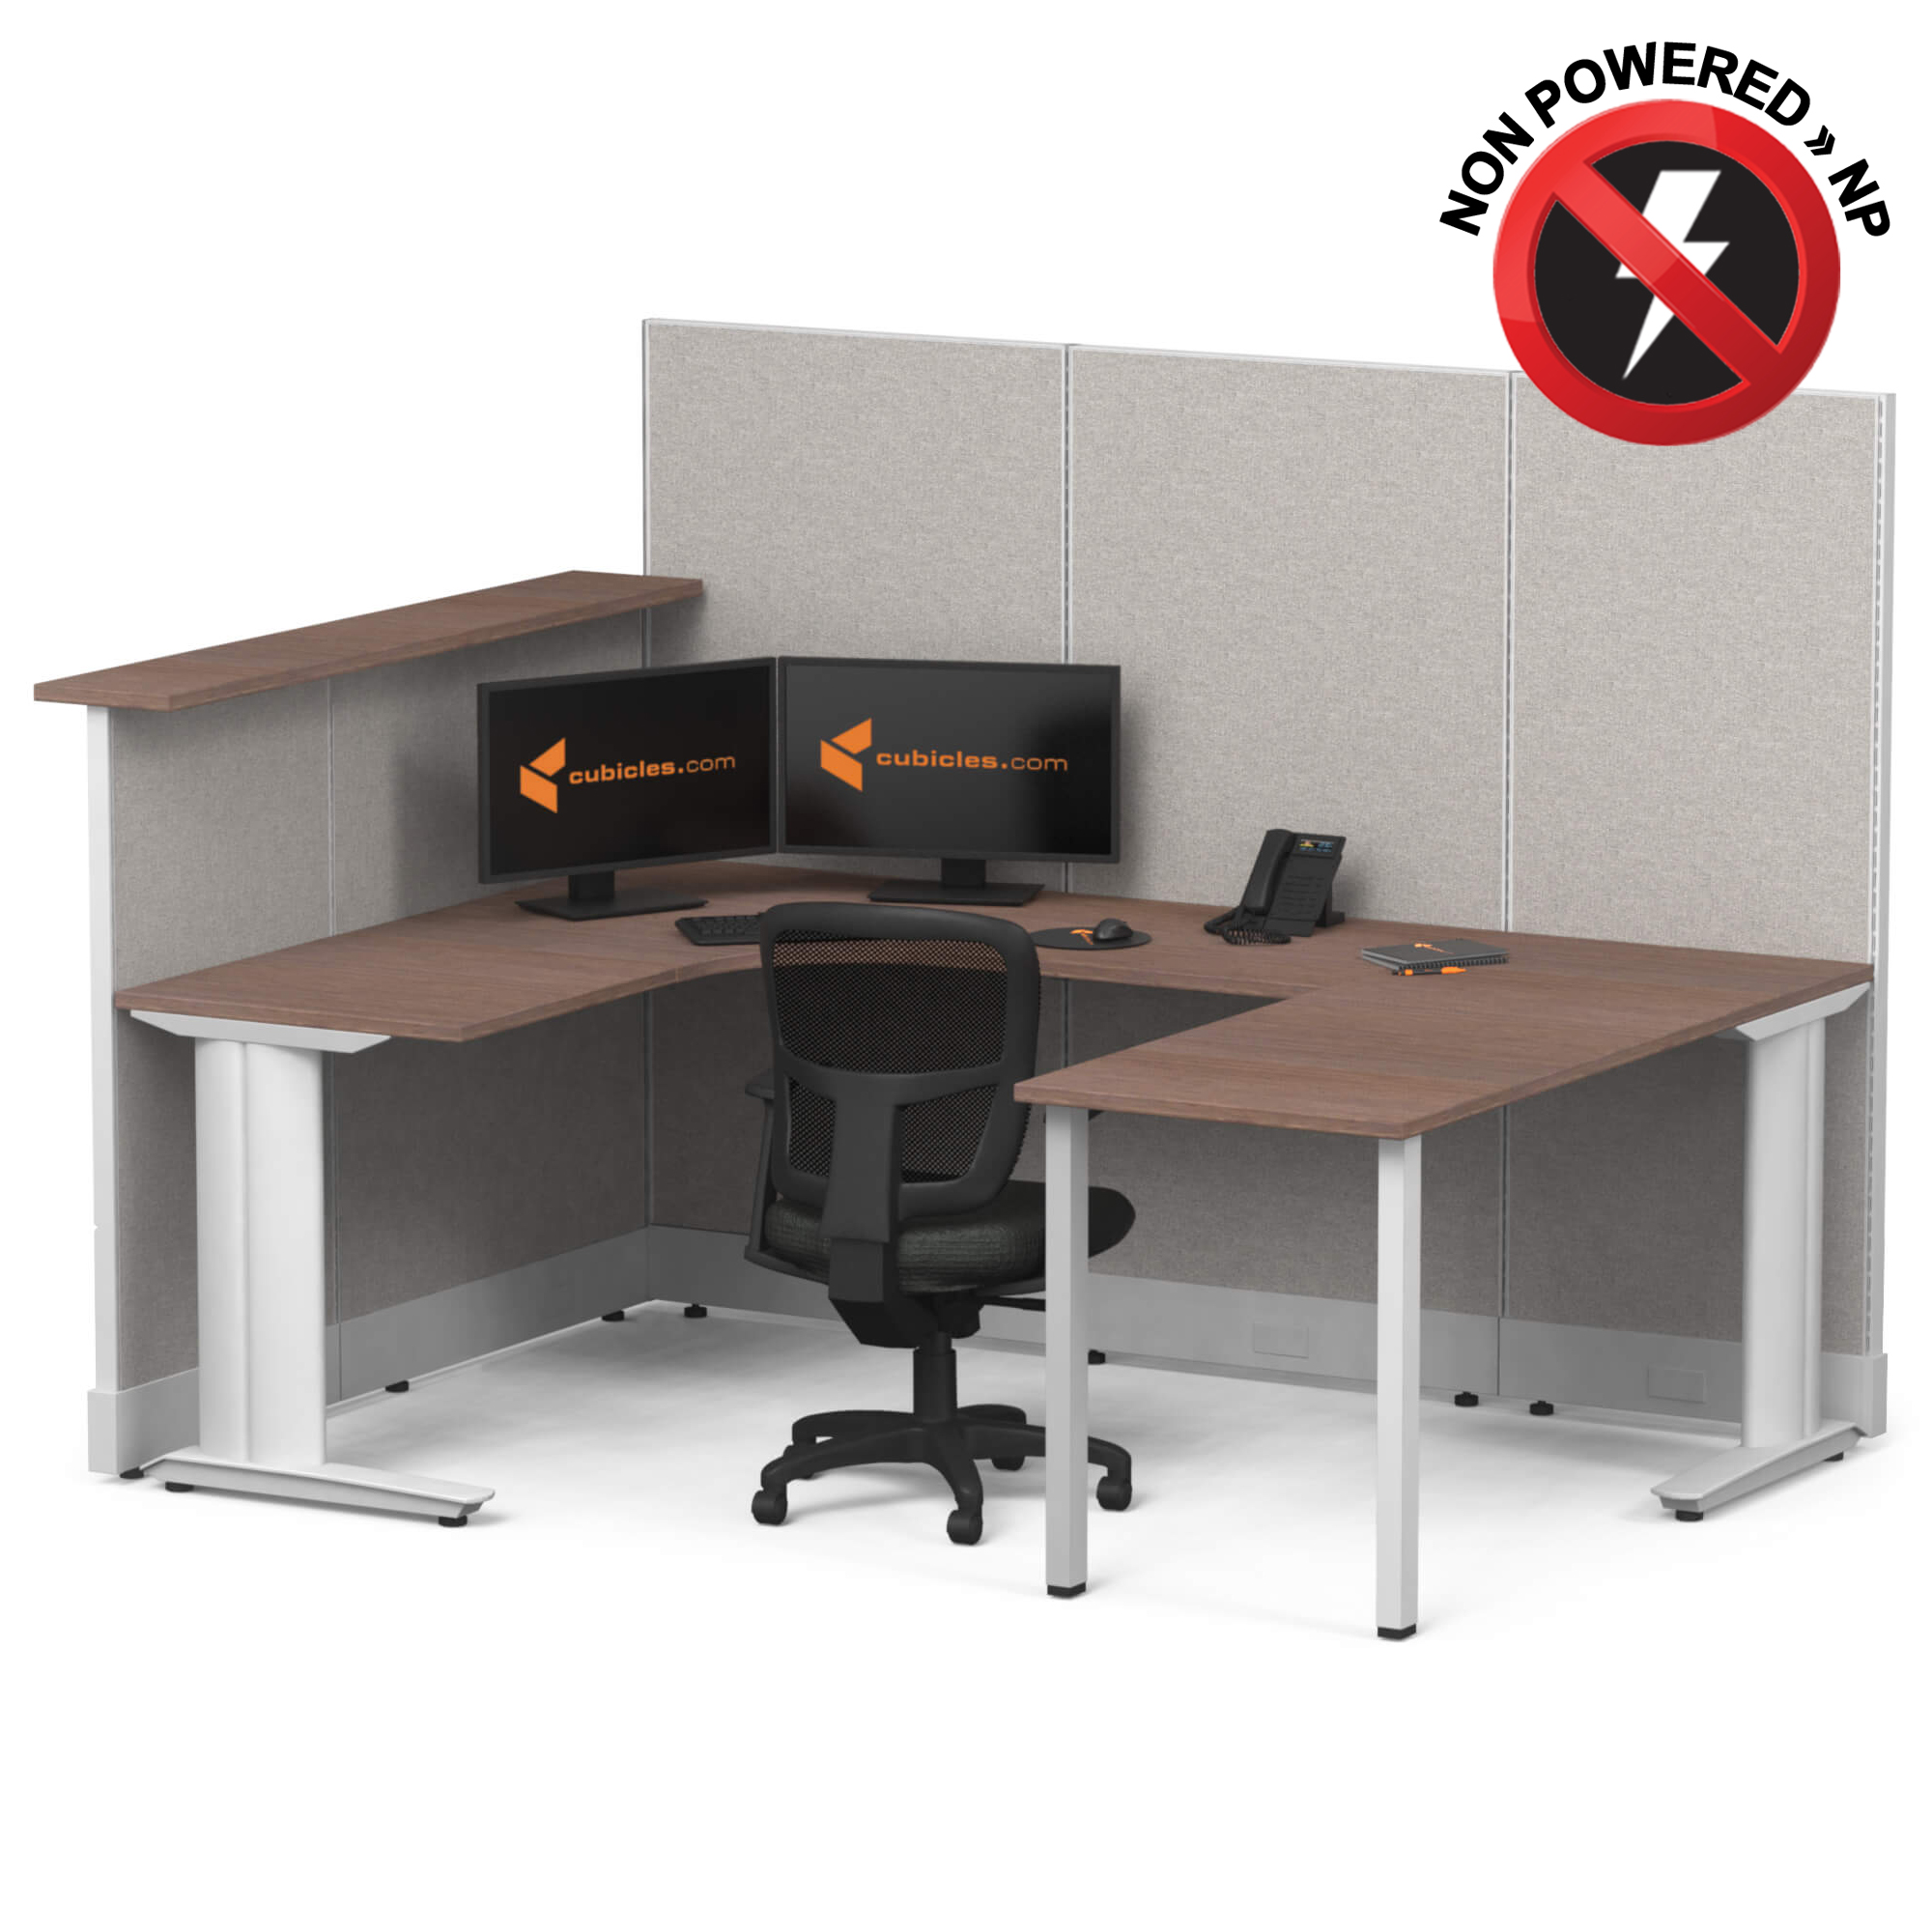 cubicle-desk-u-shaped-workstation-non-powered-with-transaction-top-sign.jpg